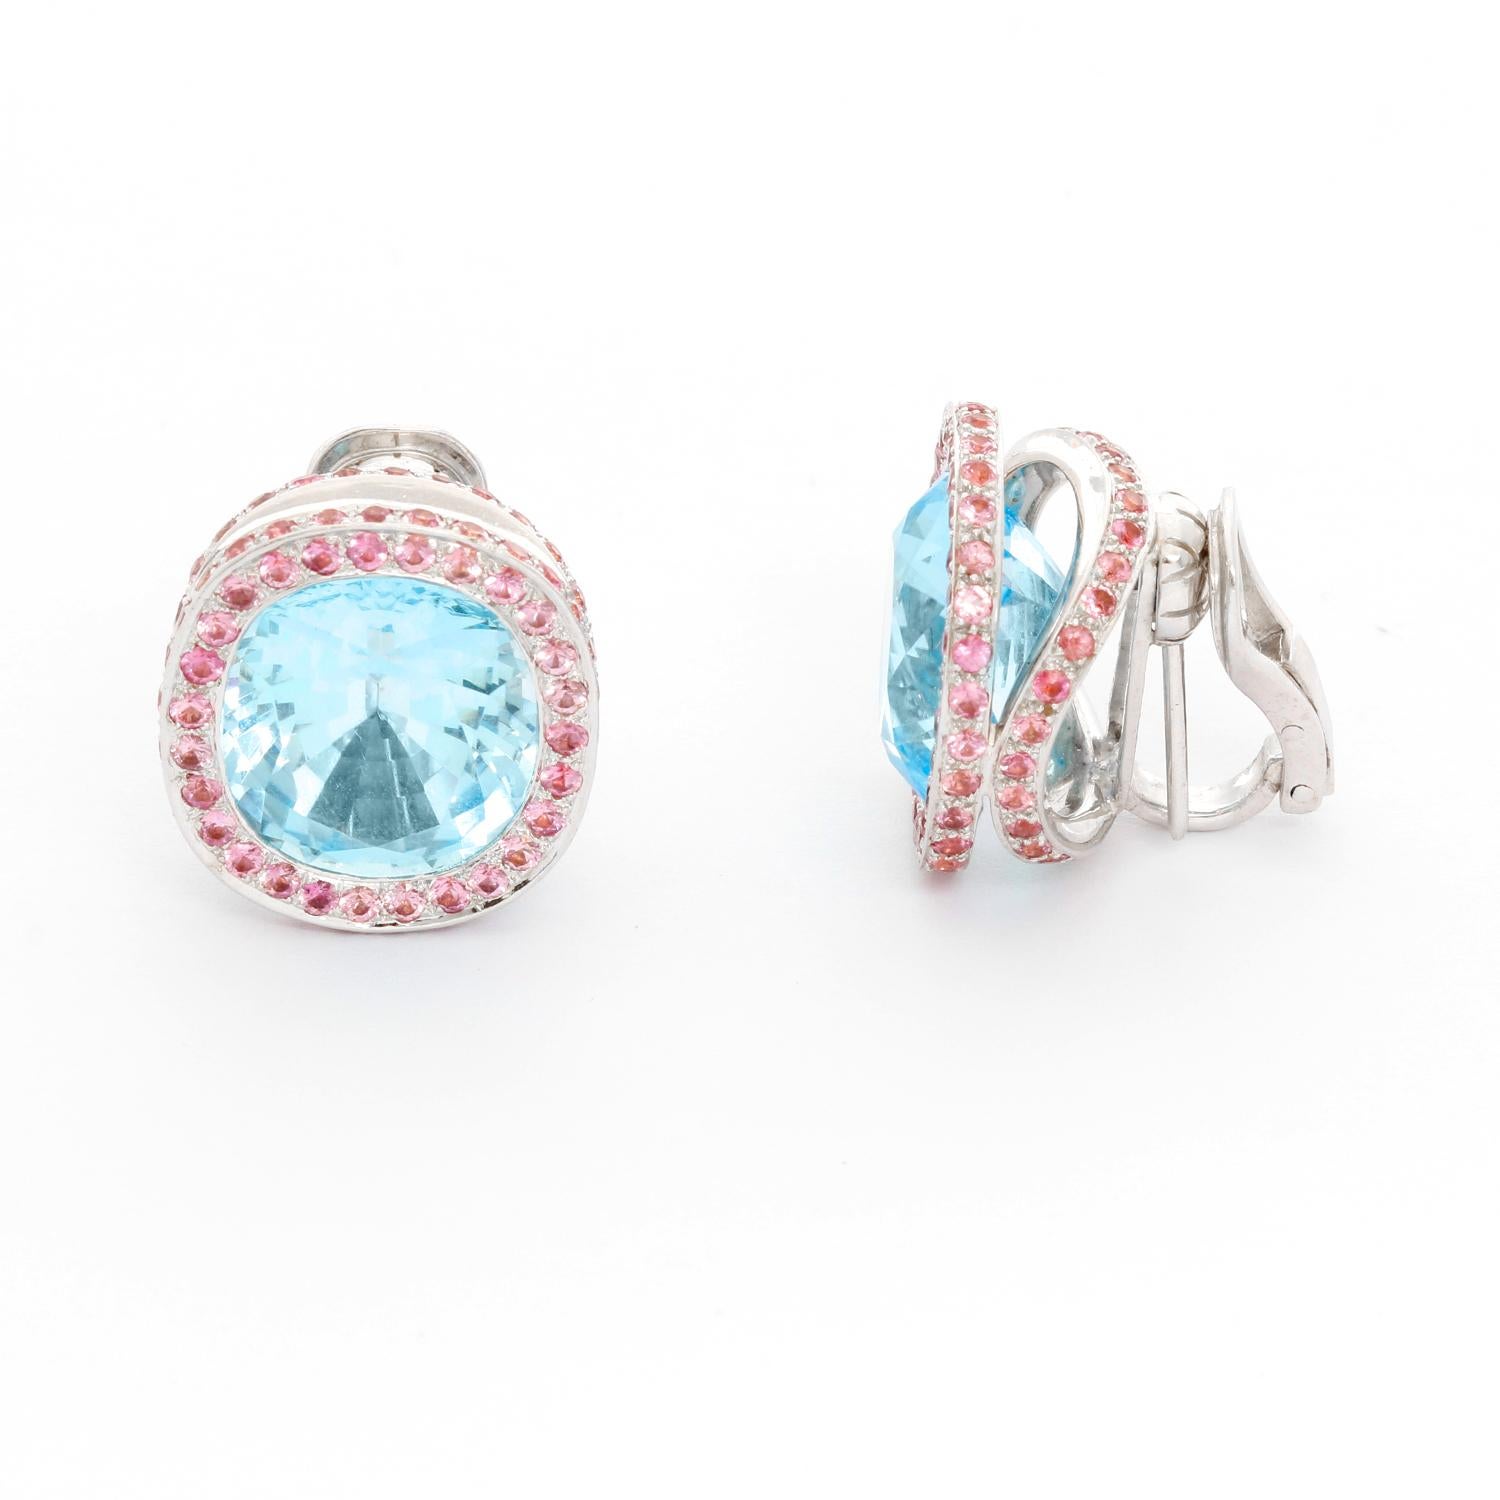 18K White Gold Blue Topaz and Pink Sapphire Earrings - Gorgeous cushion shaped blue topaz earrings weigh a total of approx 23 cts and are surrounded by round cut pink sapphires. Sapphire total weight is approx 3.45 cts. The earrings are 3/4 inch by